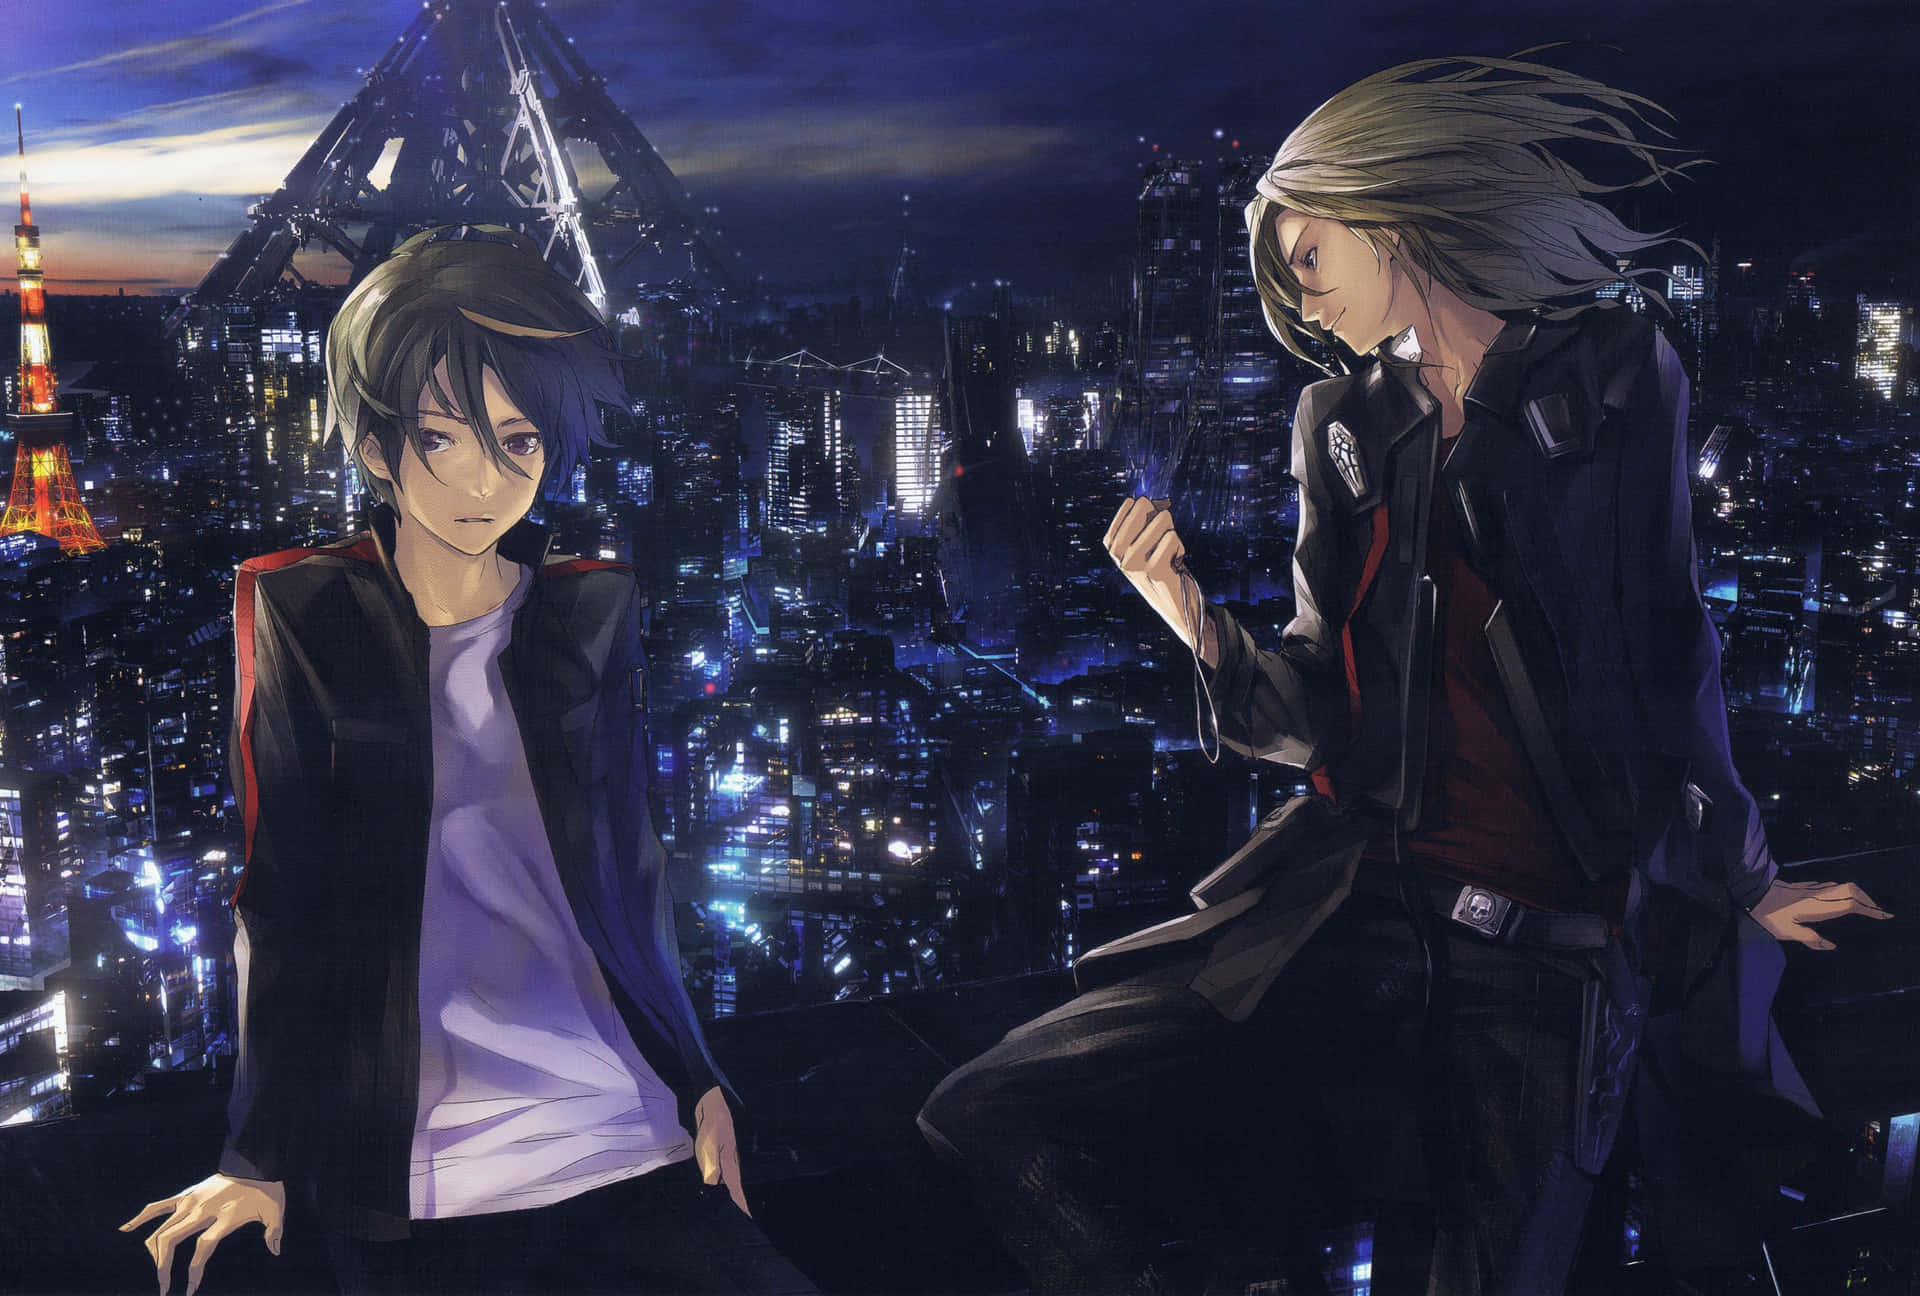 100+] Guilty Crown Pictures